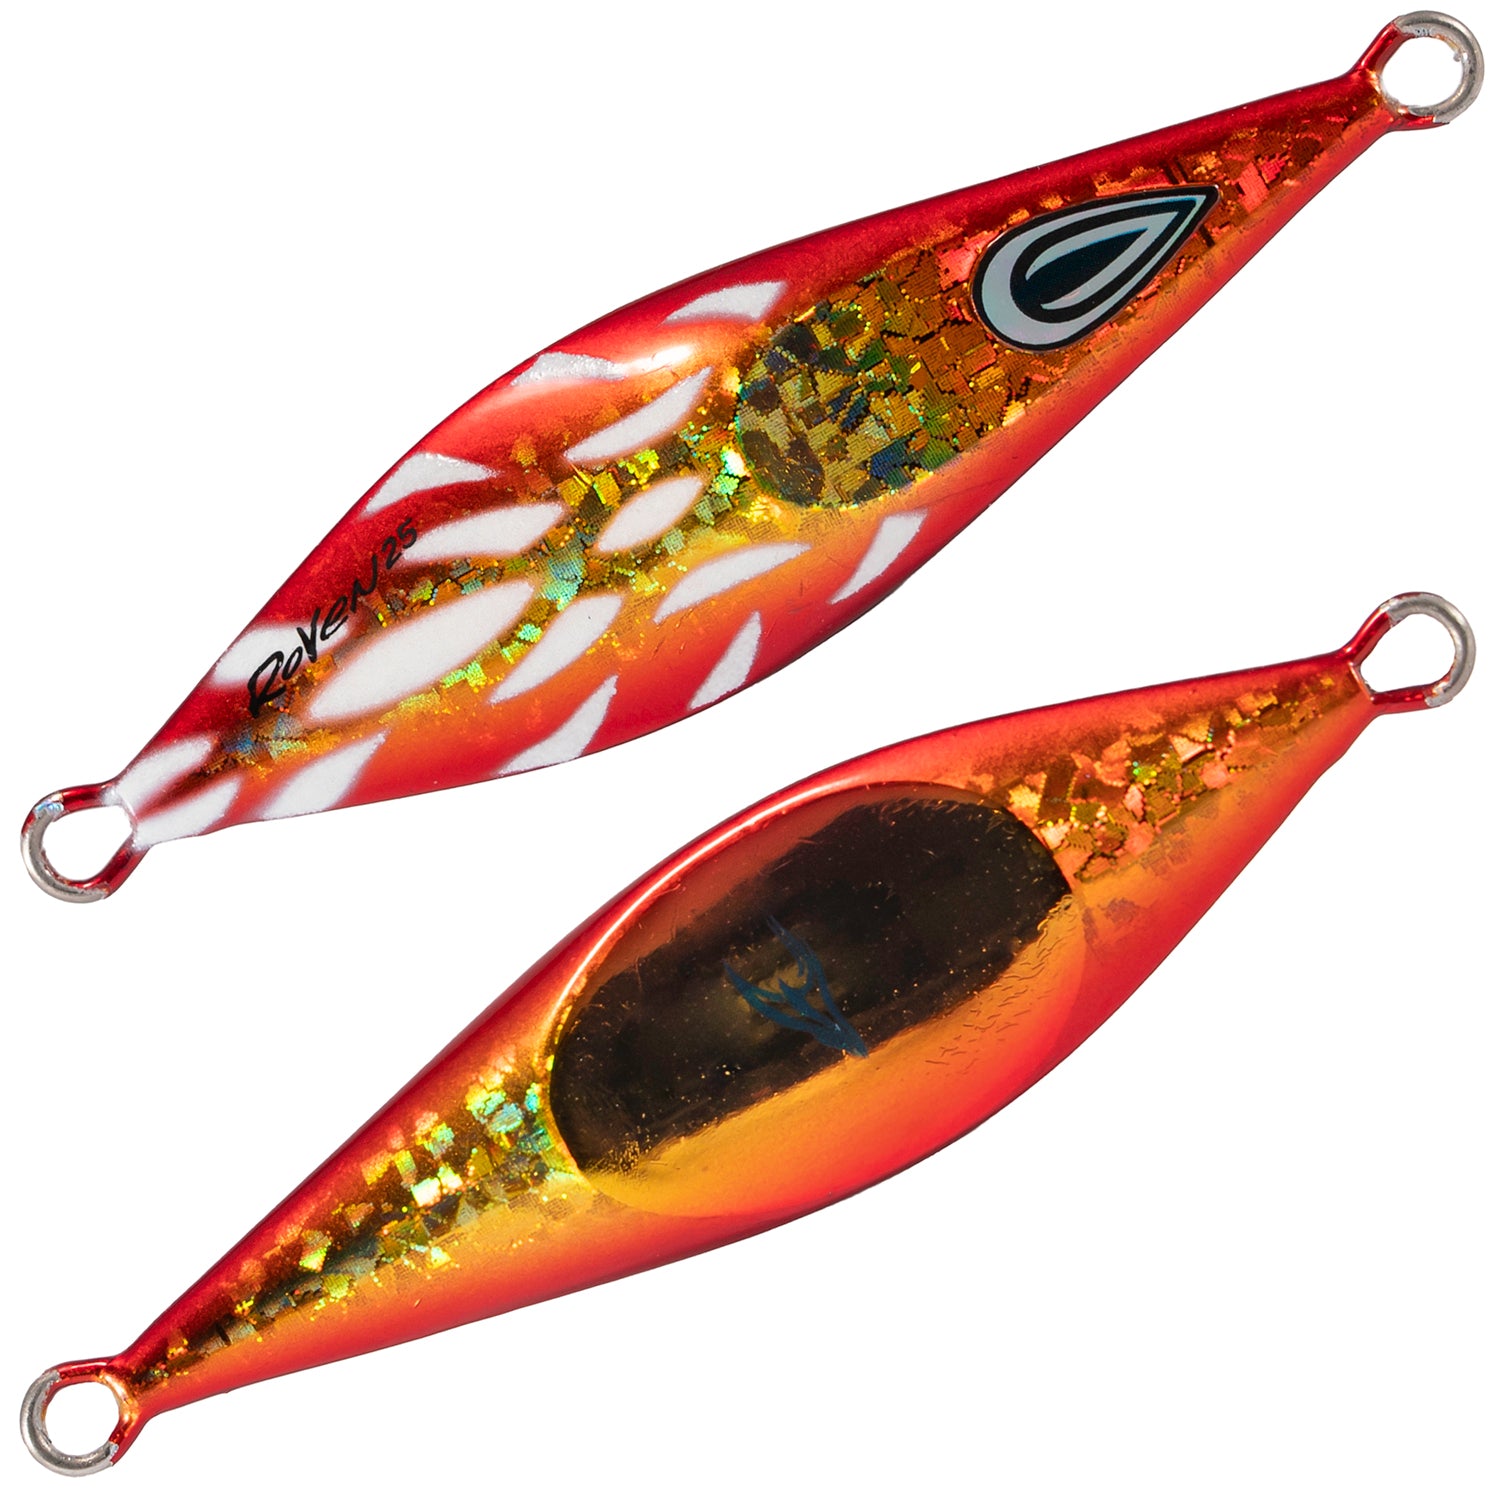 Oceans Legacy Roven Jig Rigged 15g 4